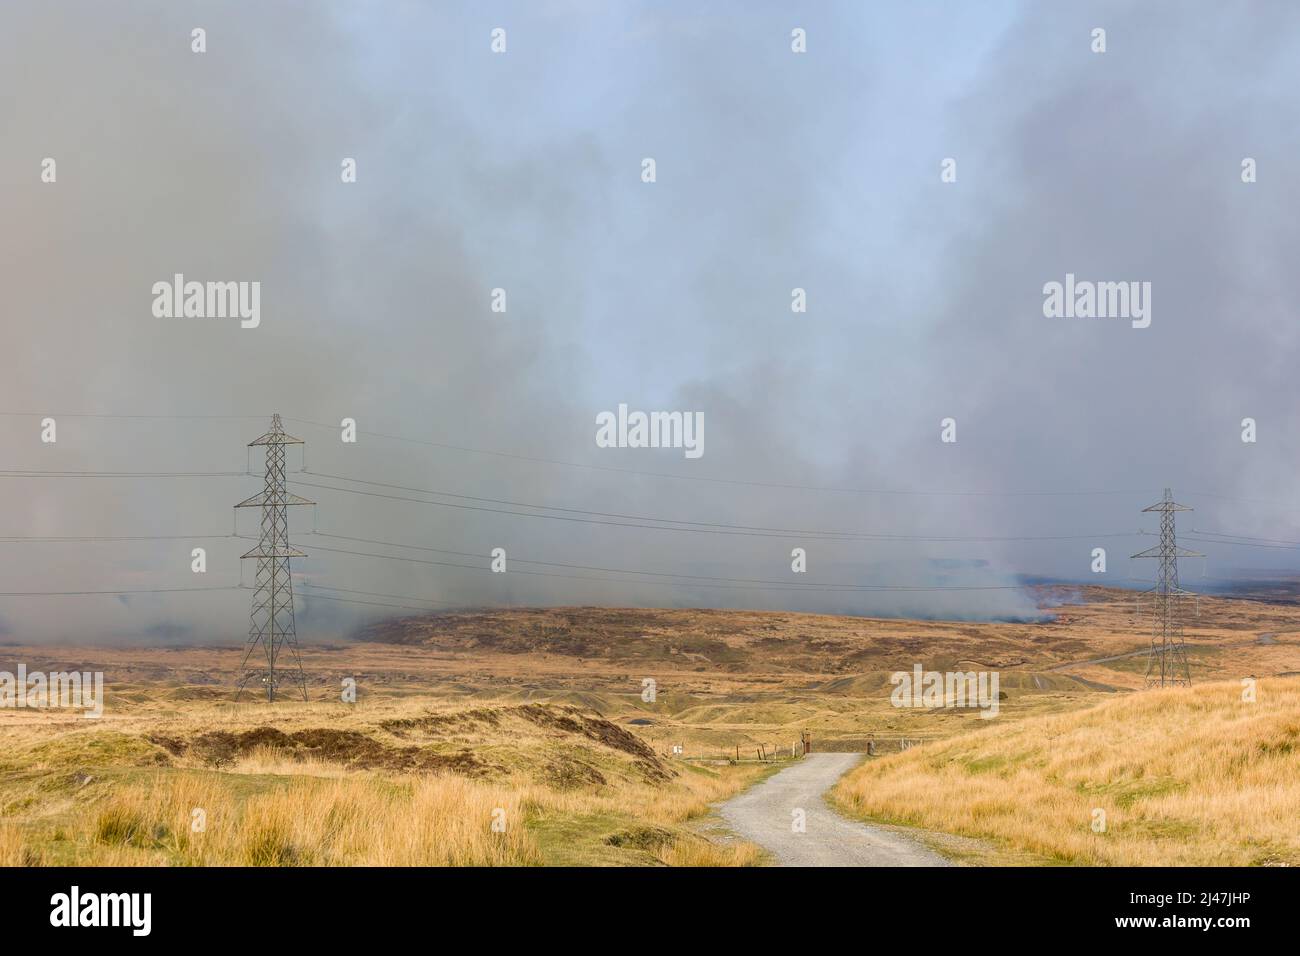 Fire fighters dealing with a large grassfire on an upland moors in Wales Stock Photo